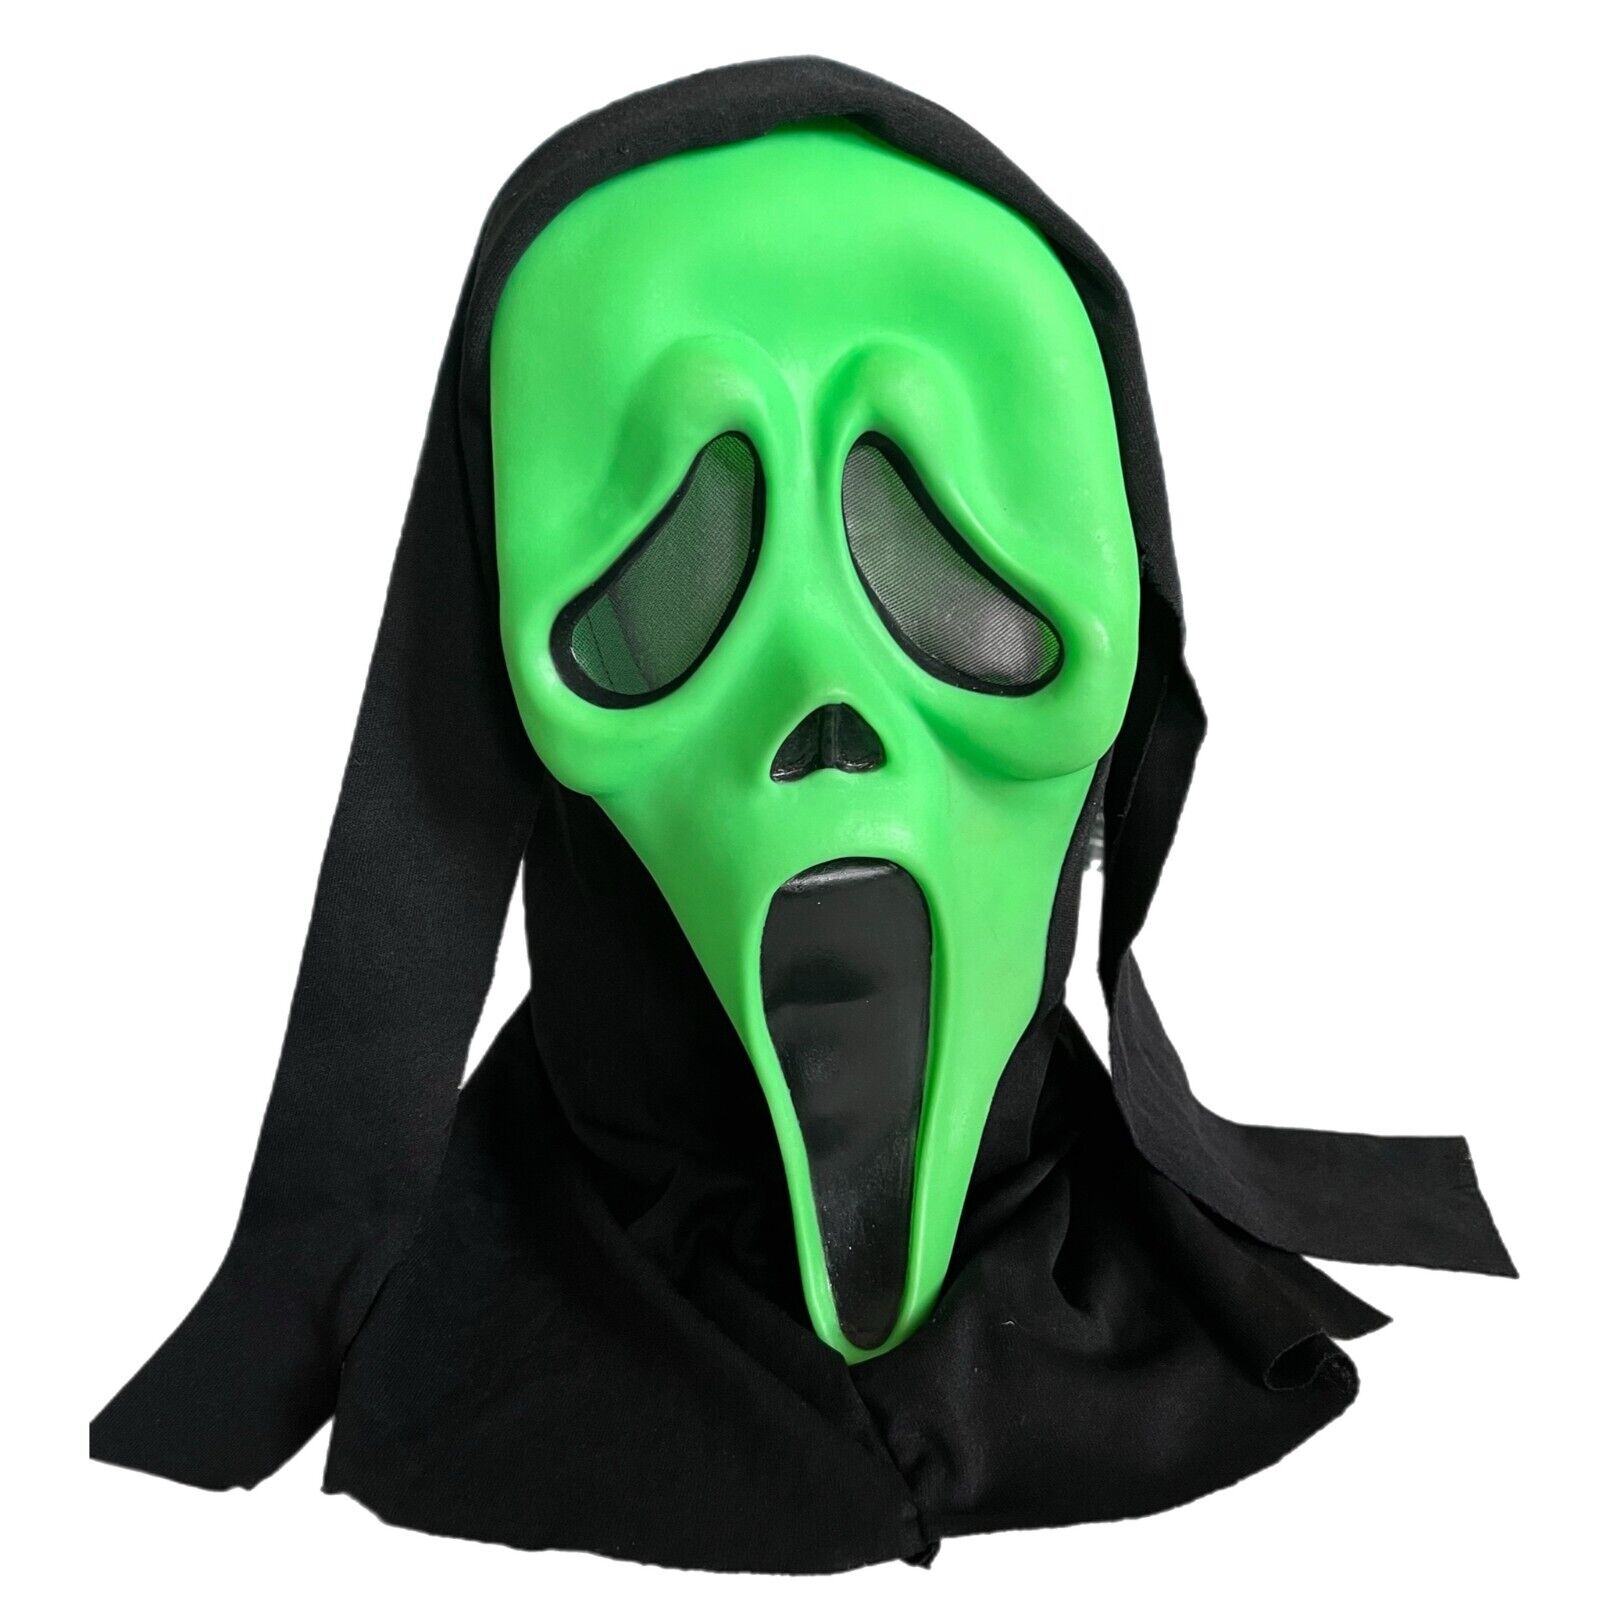 Vintage Easter Unlimited Fun World Green Ghost Face Scream Rubber Mask Costume